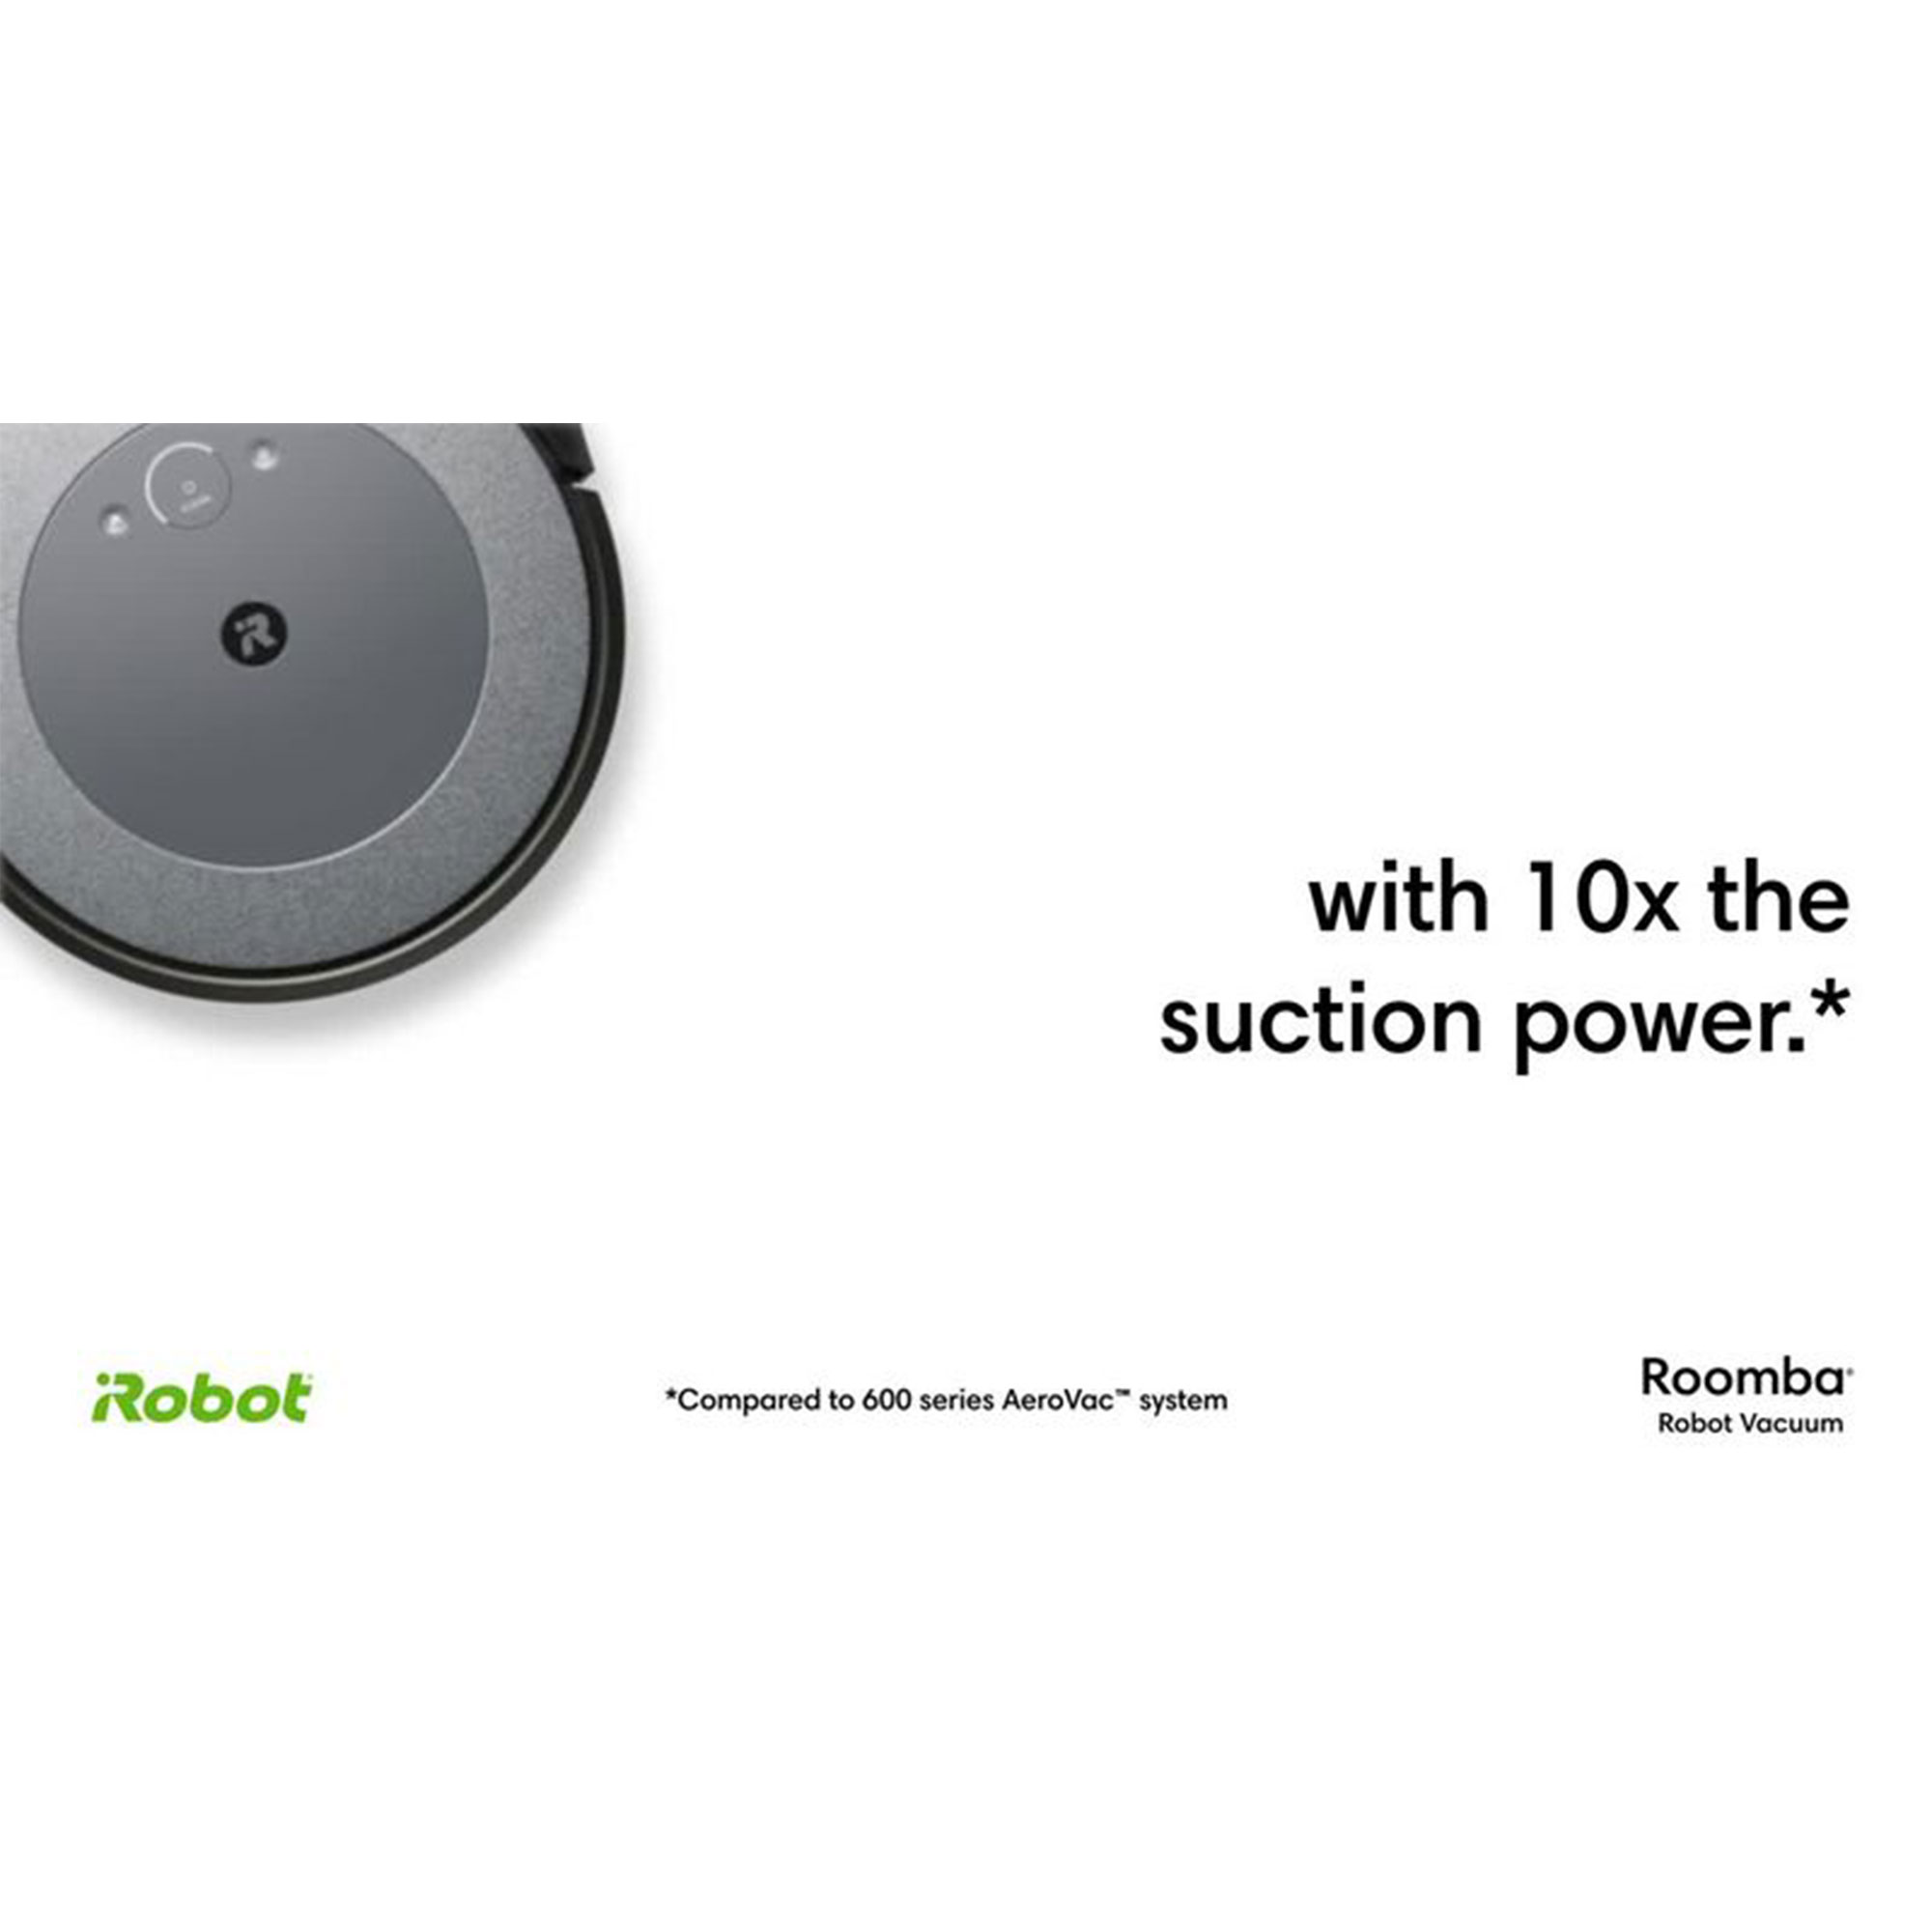 iRobot Introduces the Roomba® i3+, Expanding Its Self-Emptying